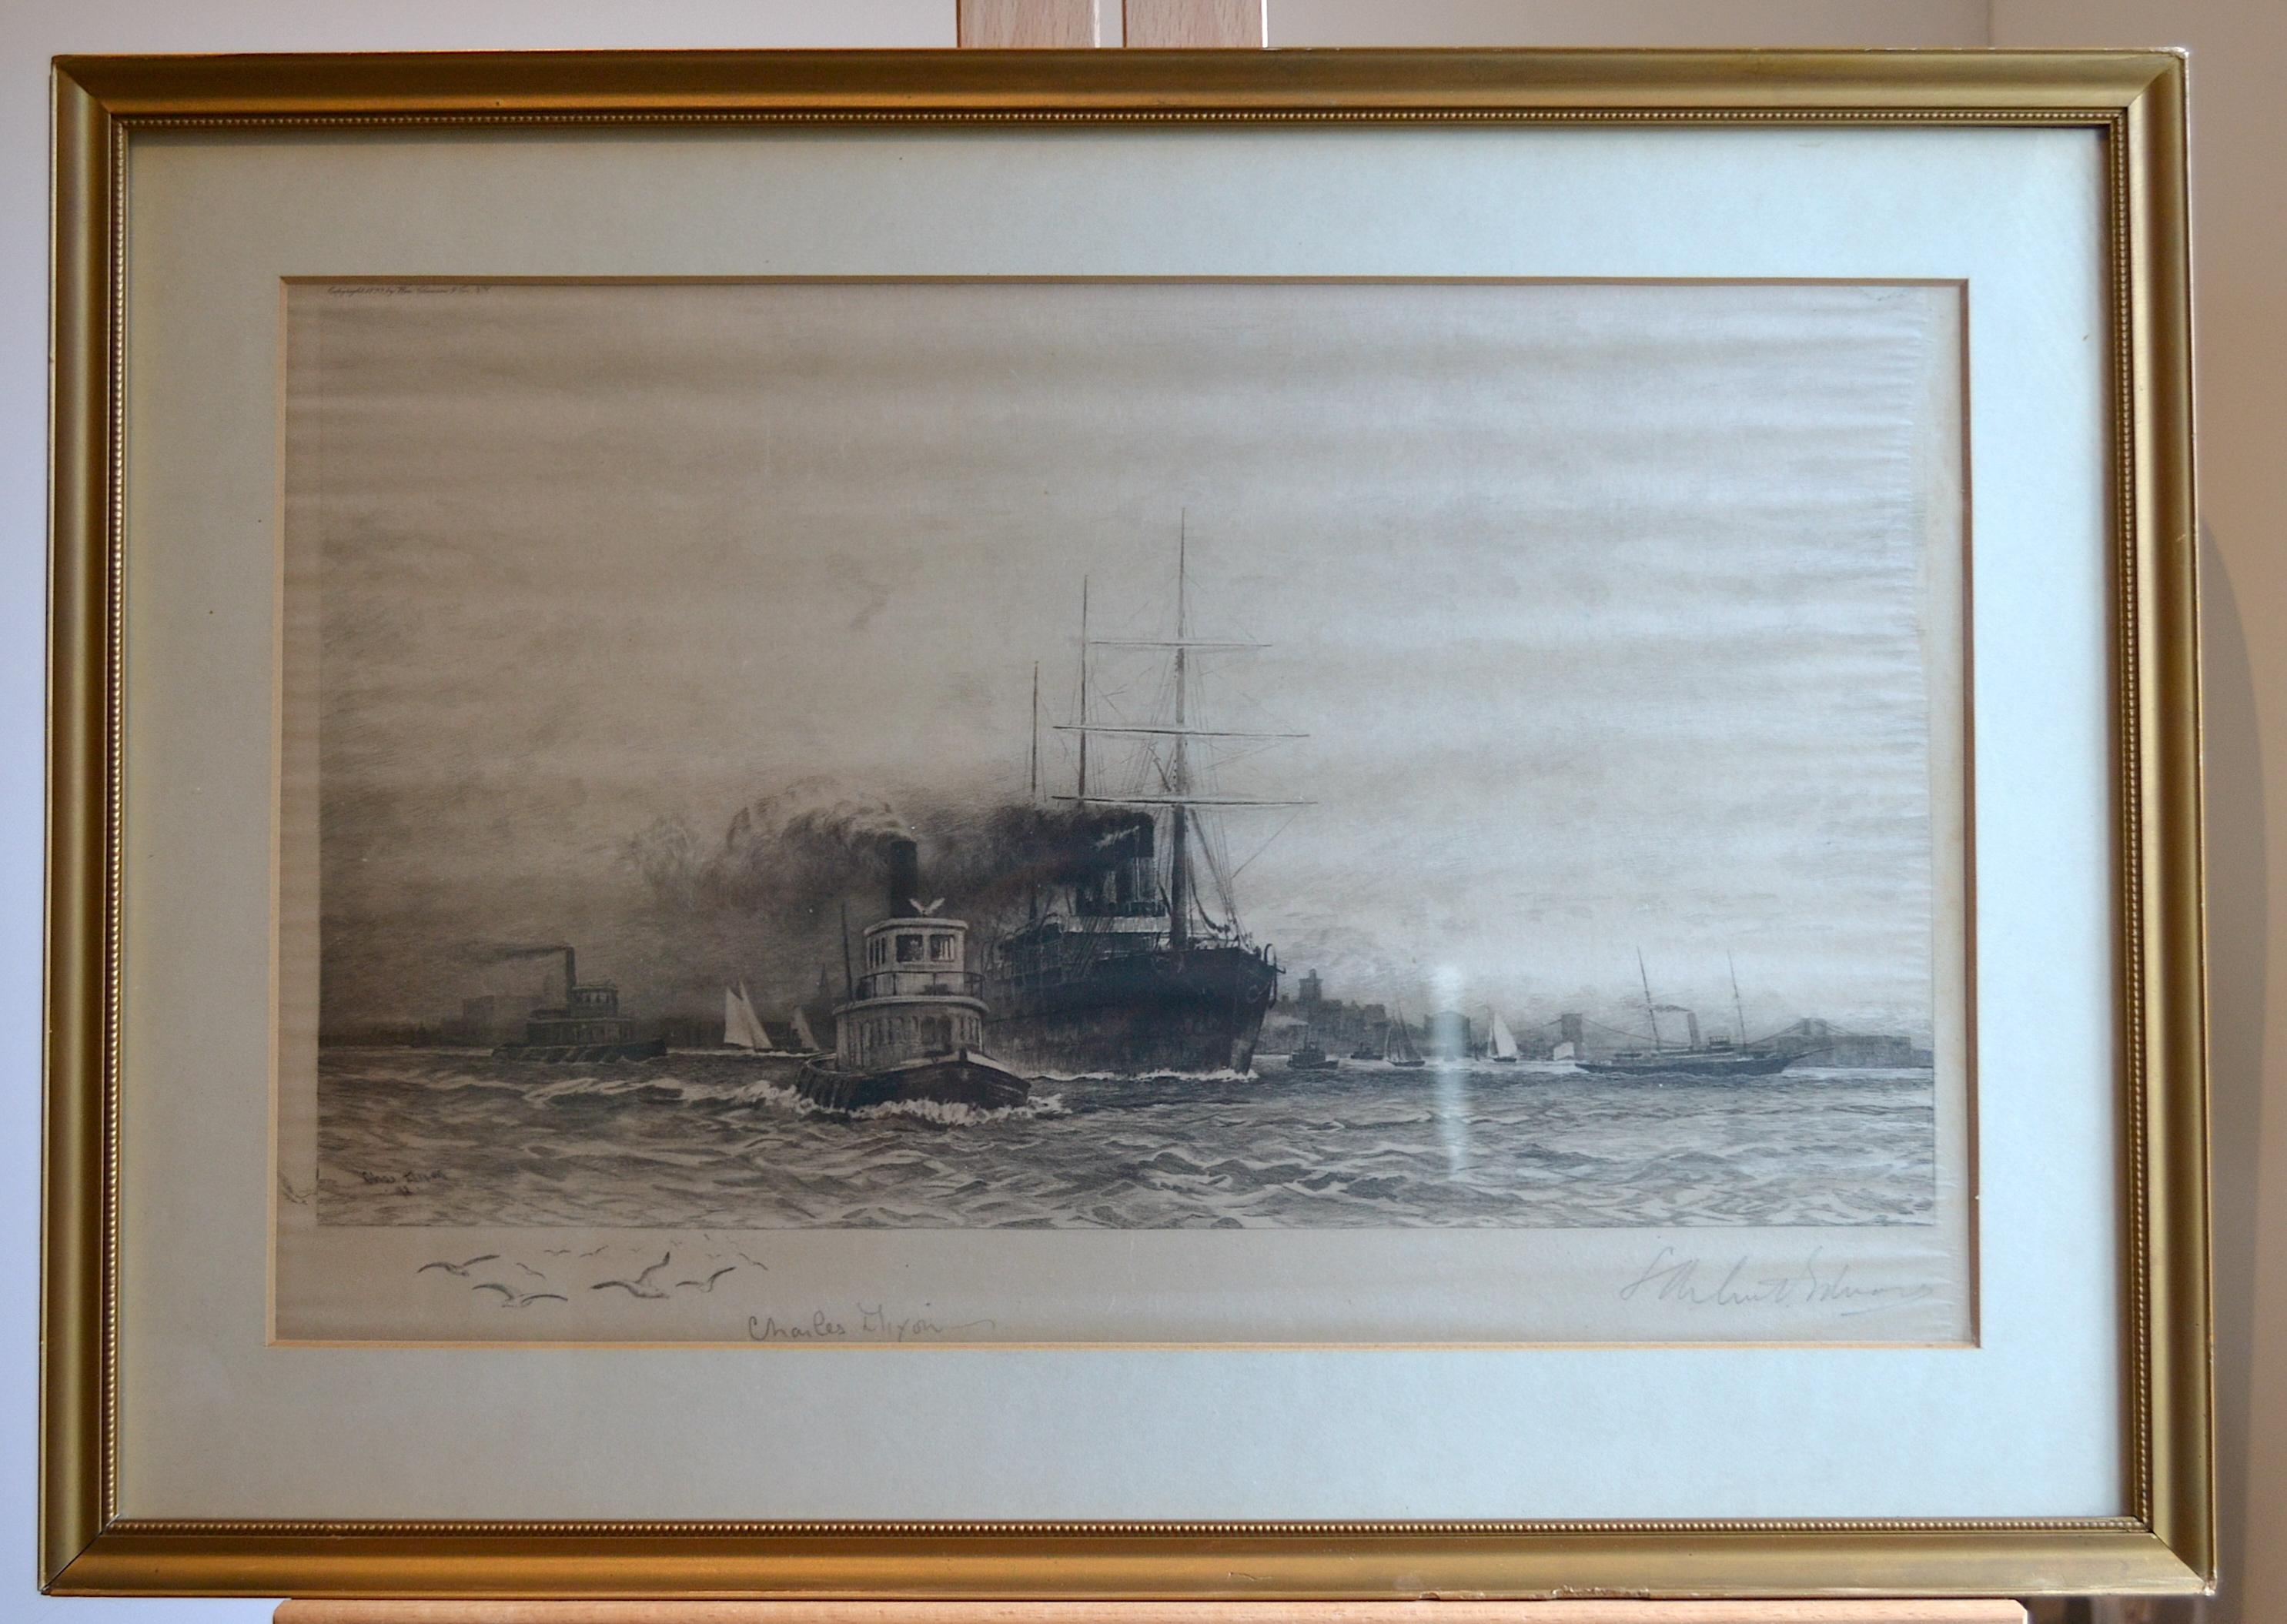 Steamship and Tugboats In New York Harbour - Gray Landscape Print by Charles Edward Dixon